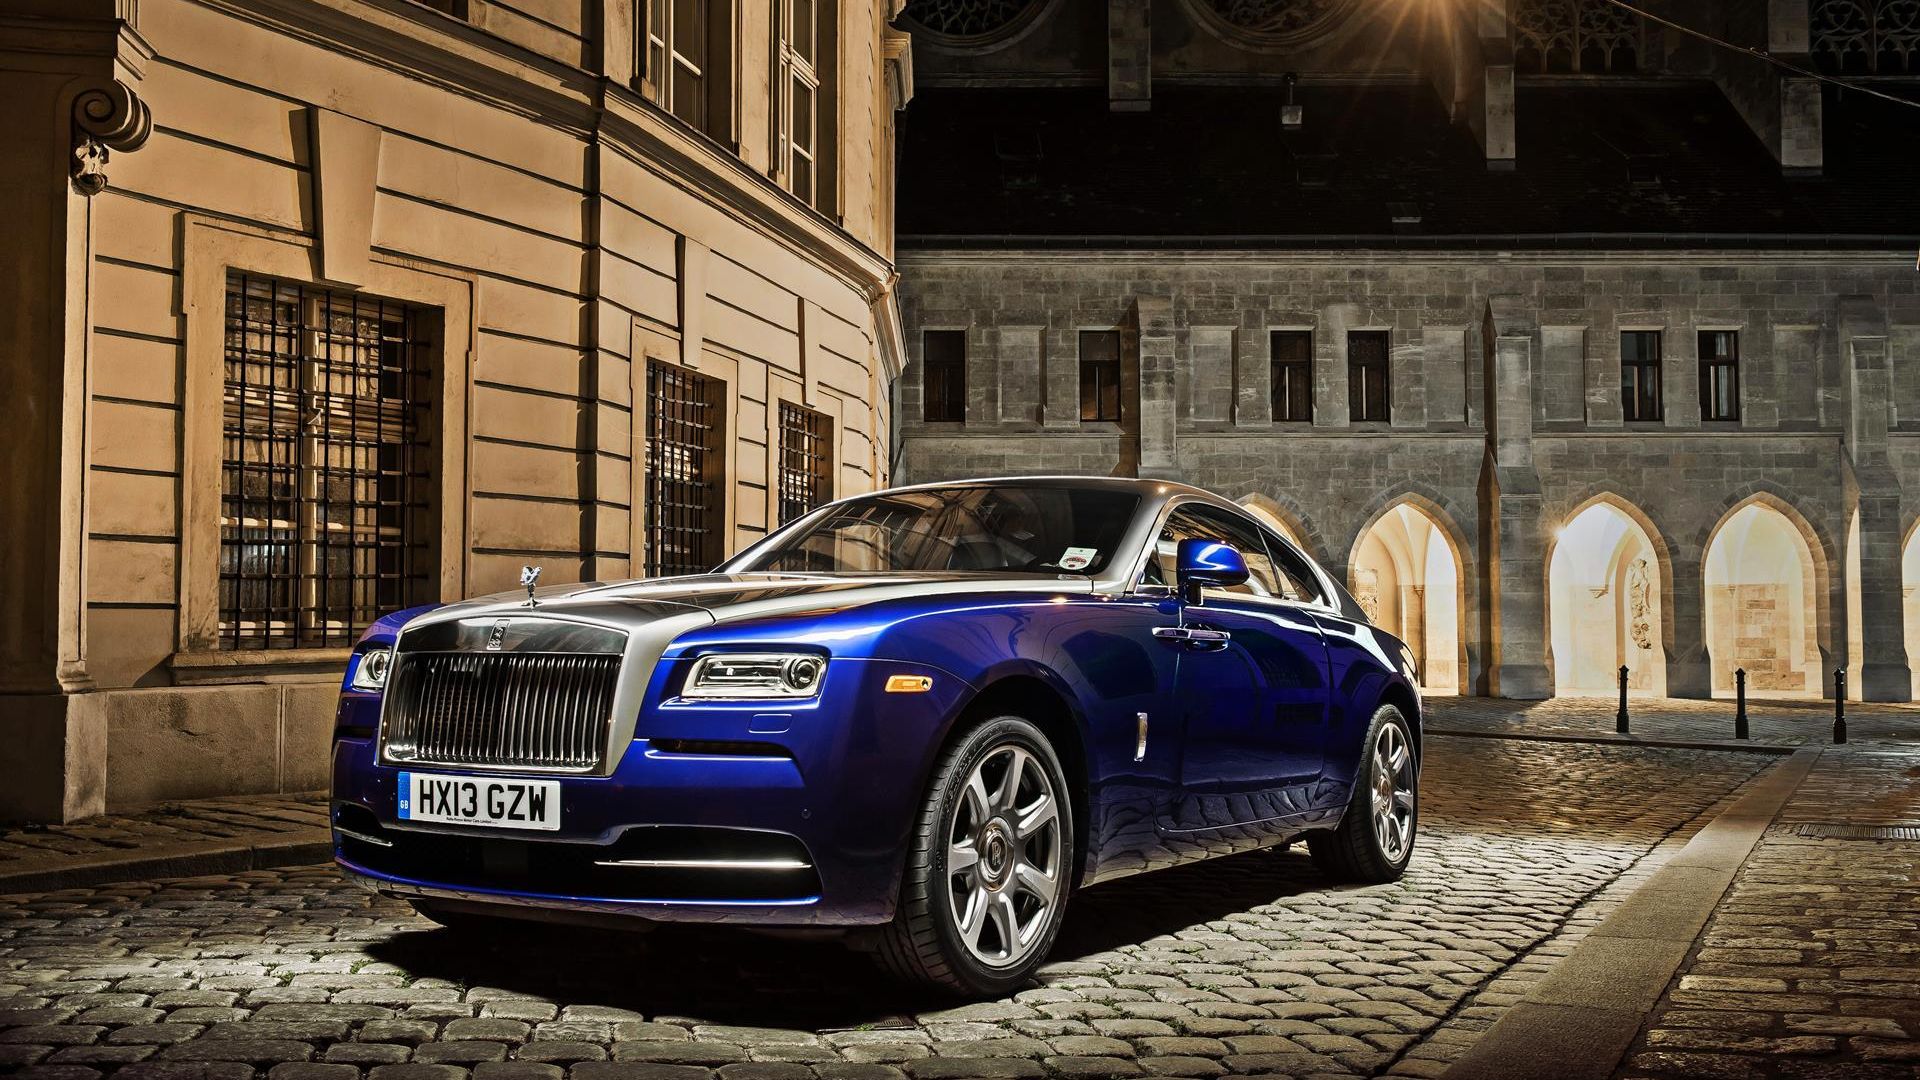 Wallpaper Rolls-Royce Wraith luxury car, front view